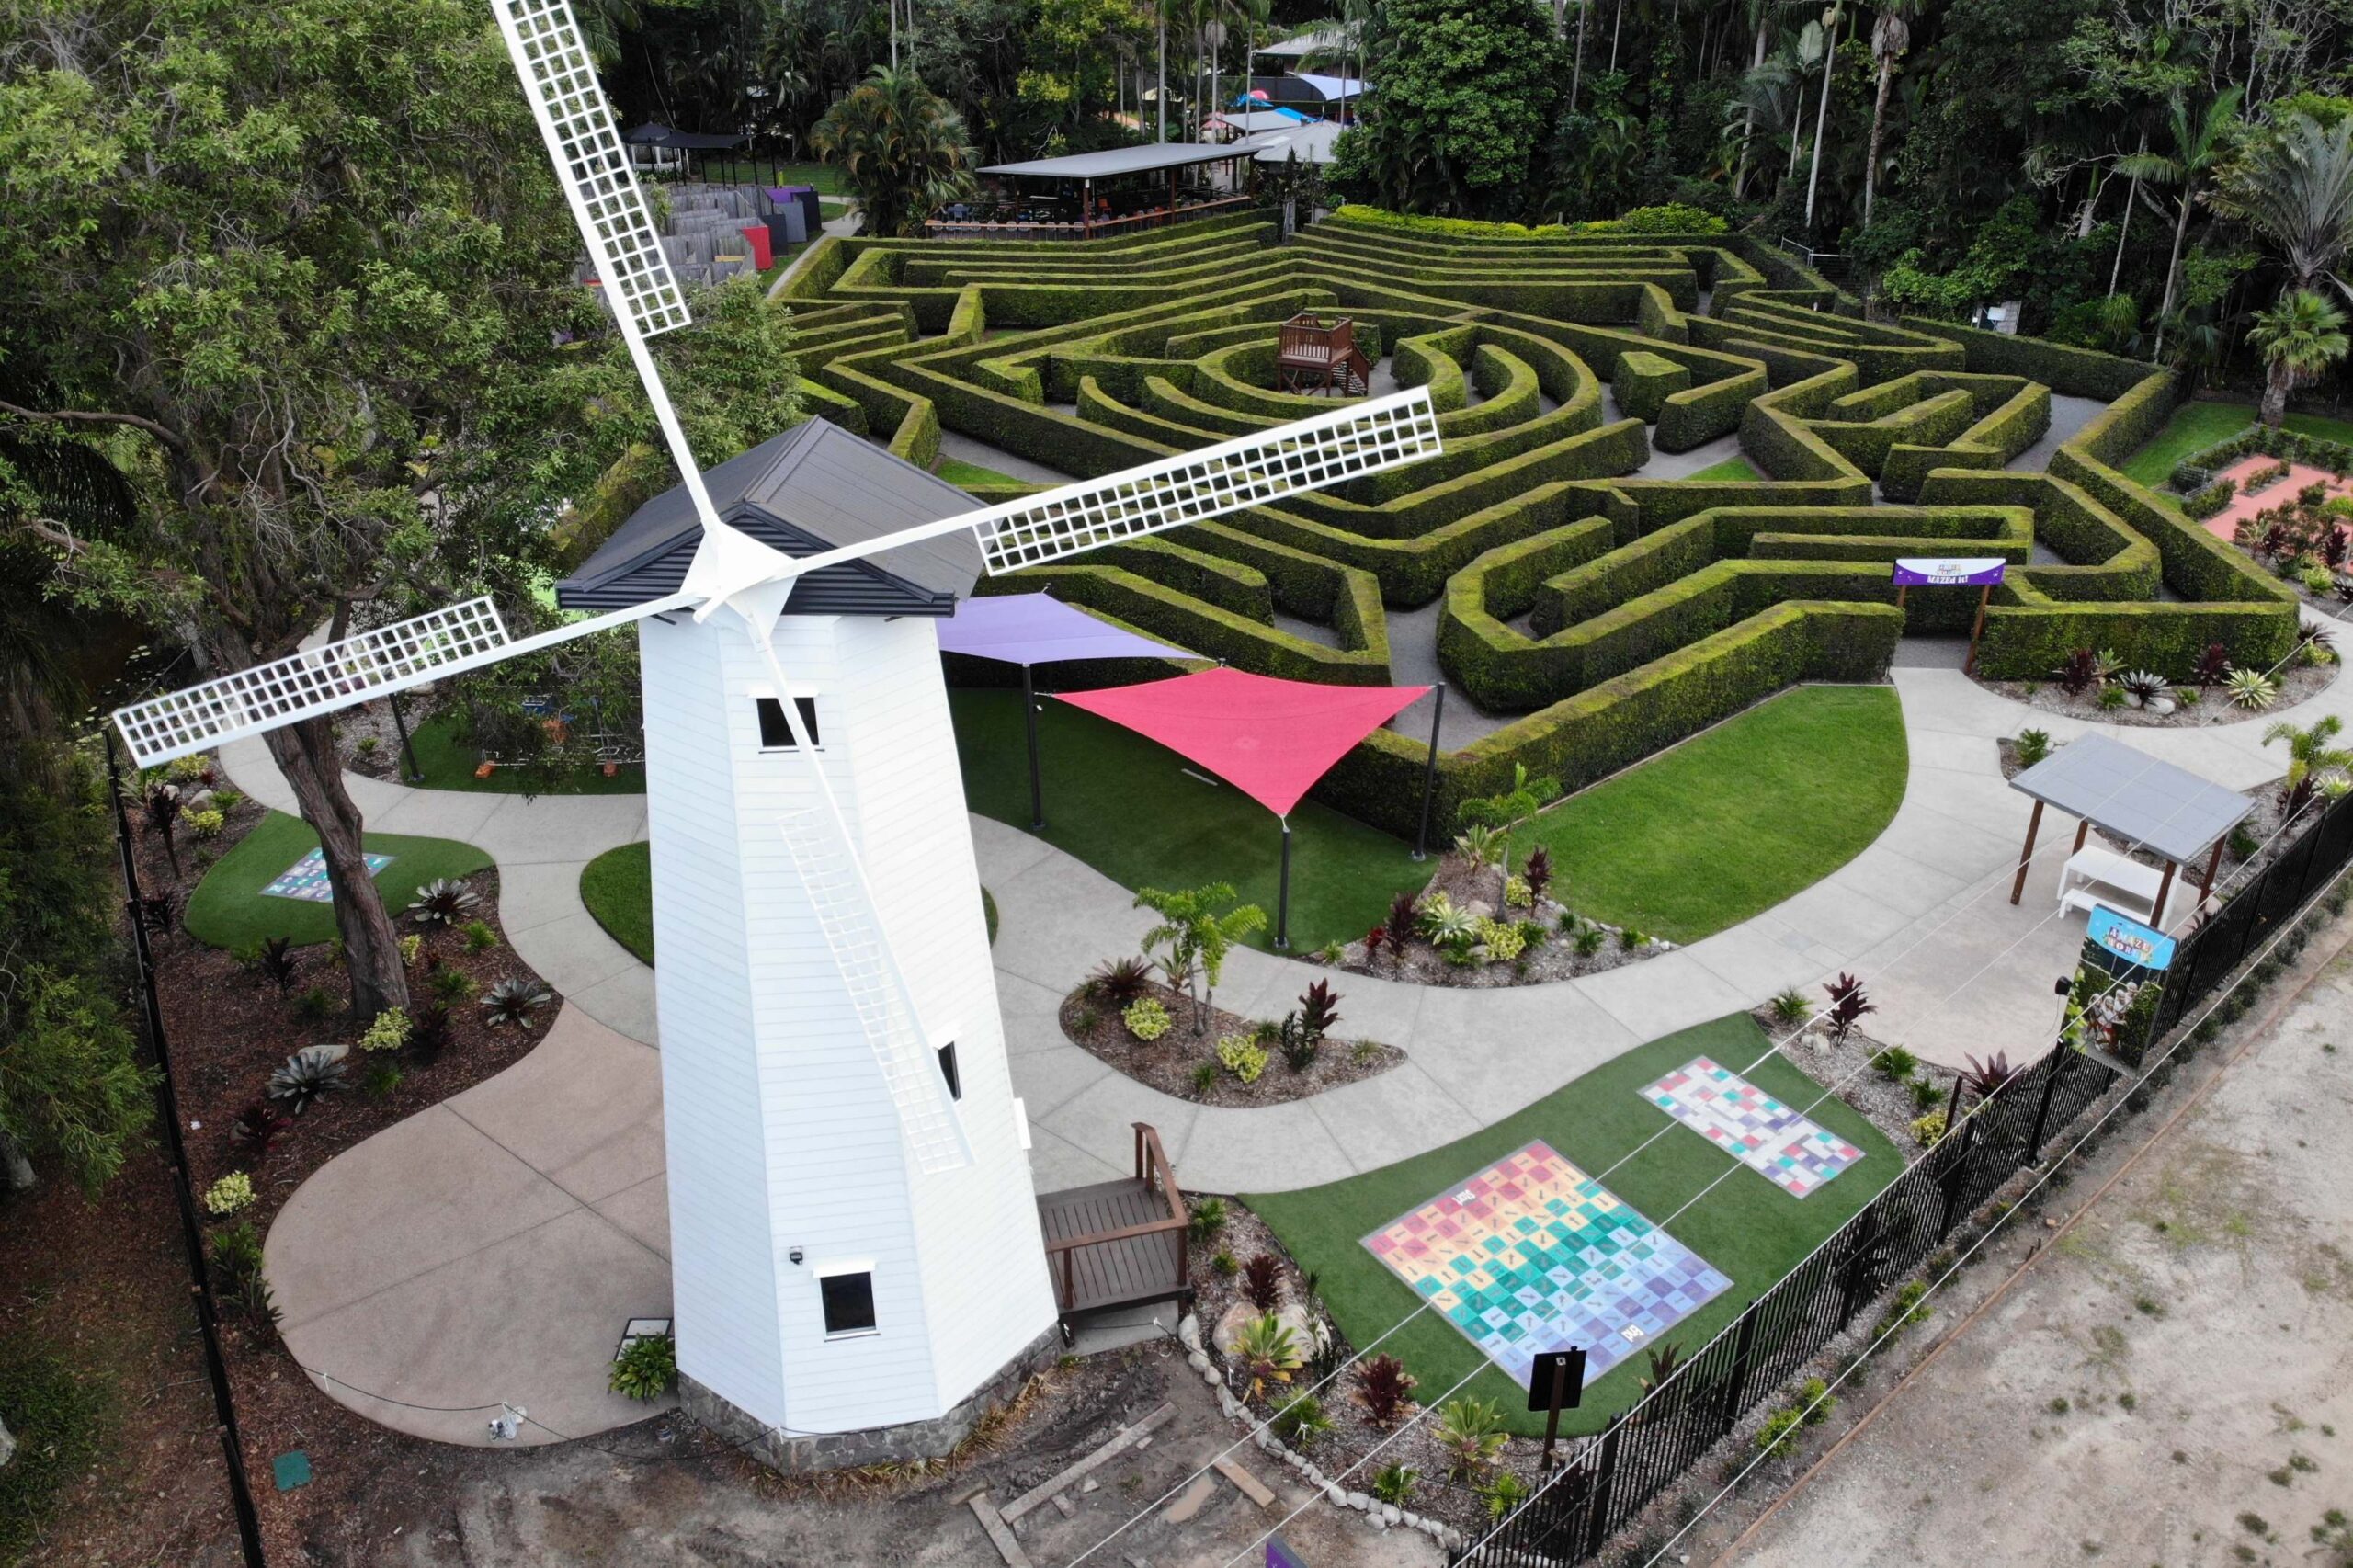 Attraction’s iconic windmill restored to former glory